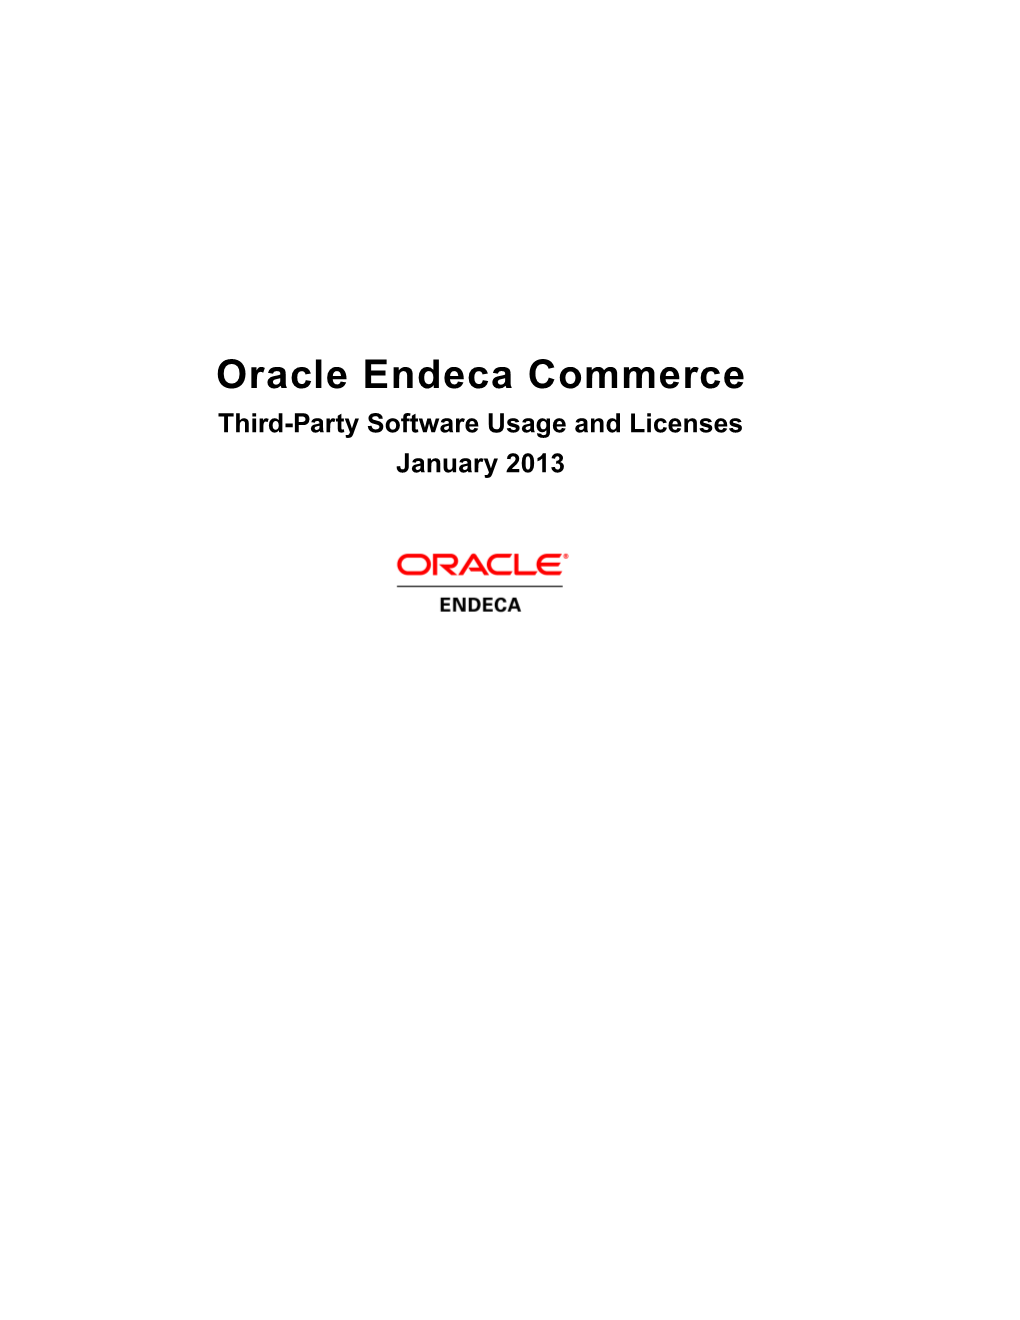 Oracle Endeca Commerce: Third-Party Software Usage And